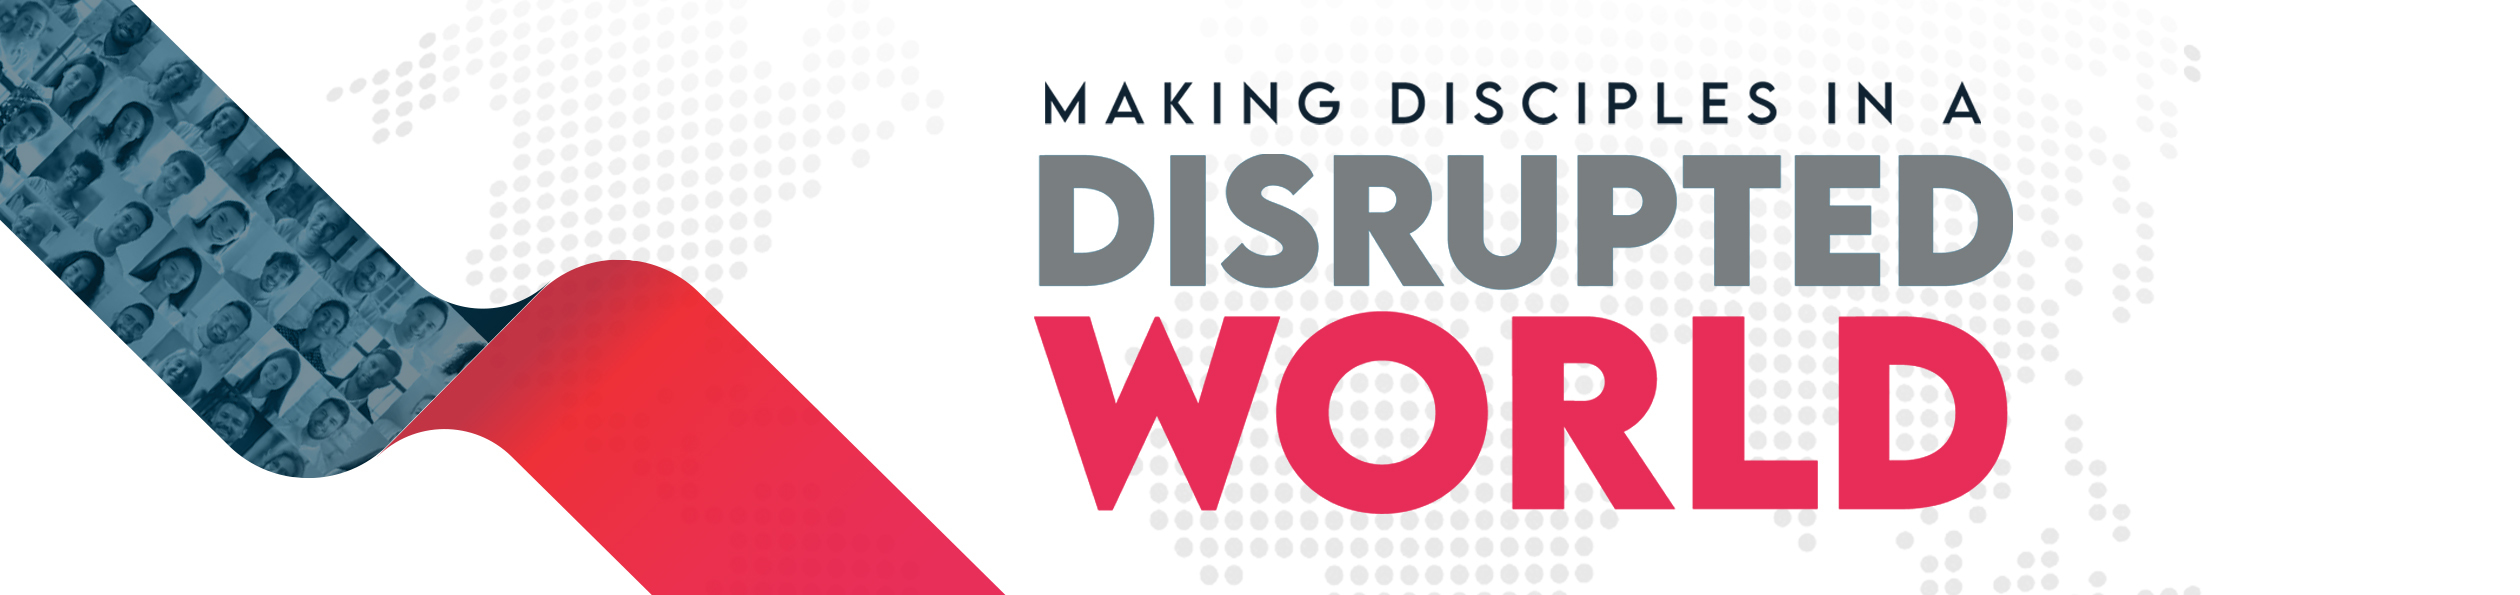 Making Disciples in a Disrupted World Banner 2530x500 jpg